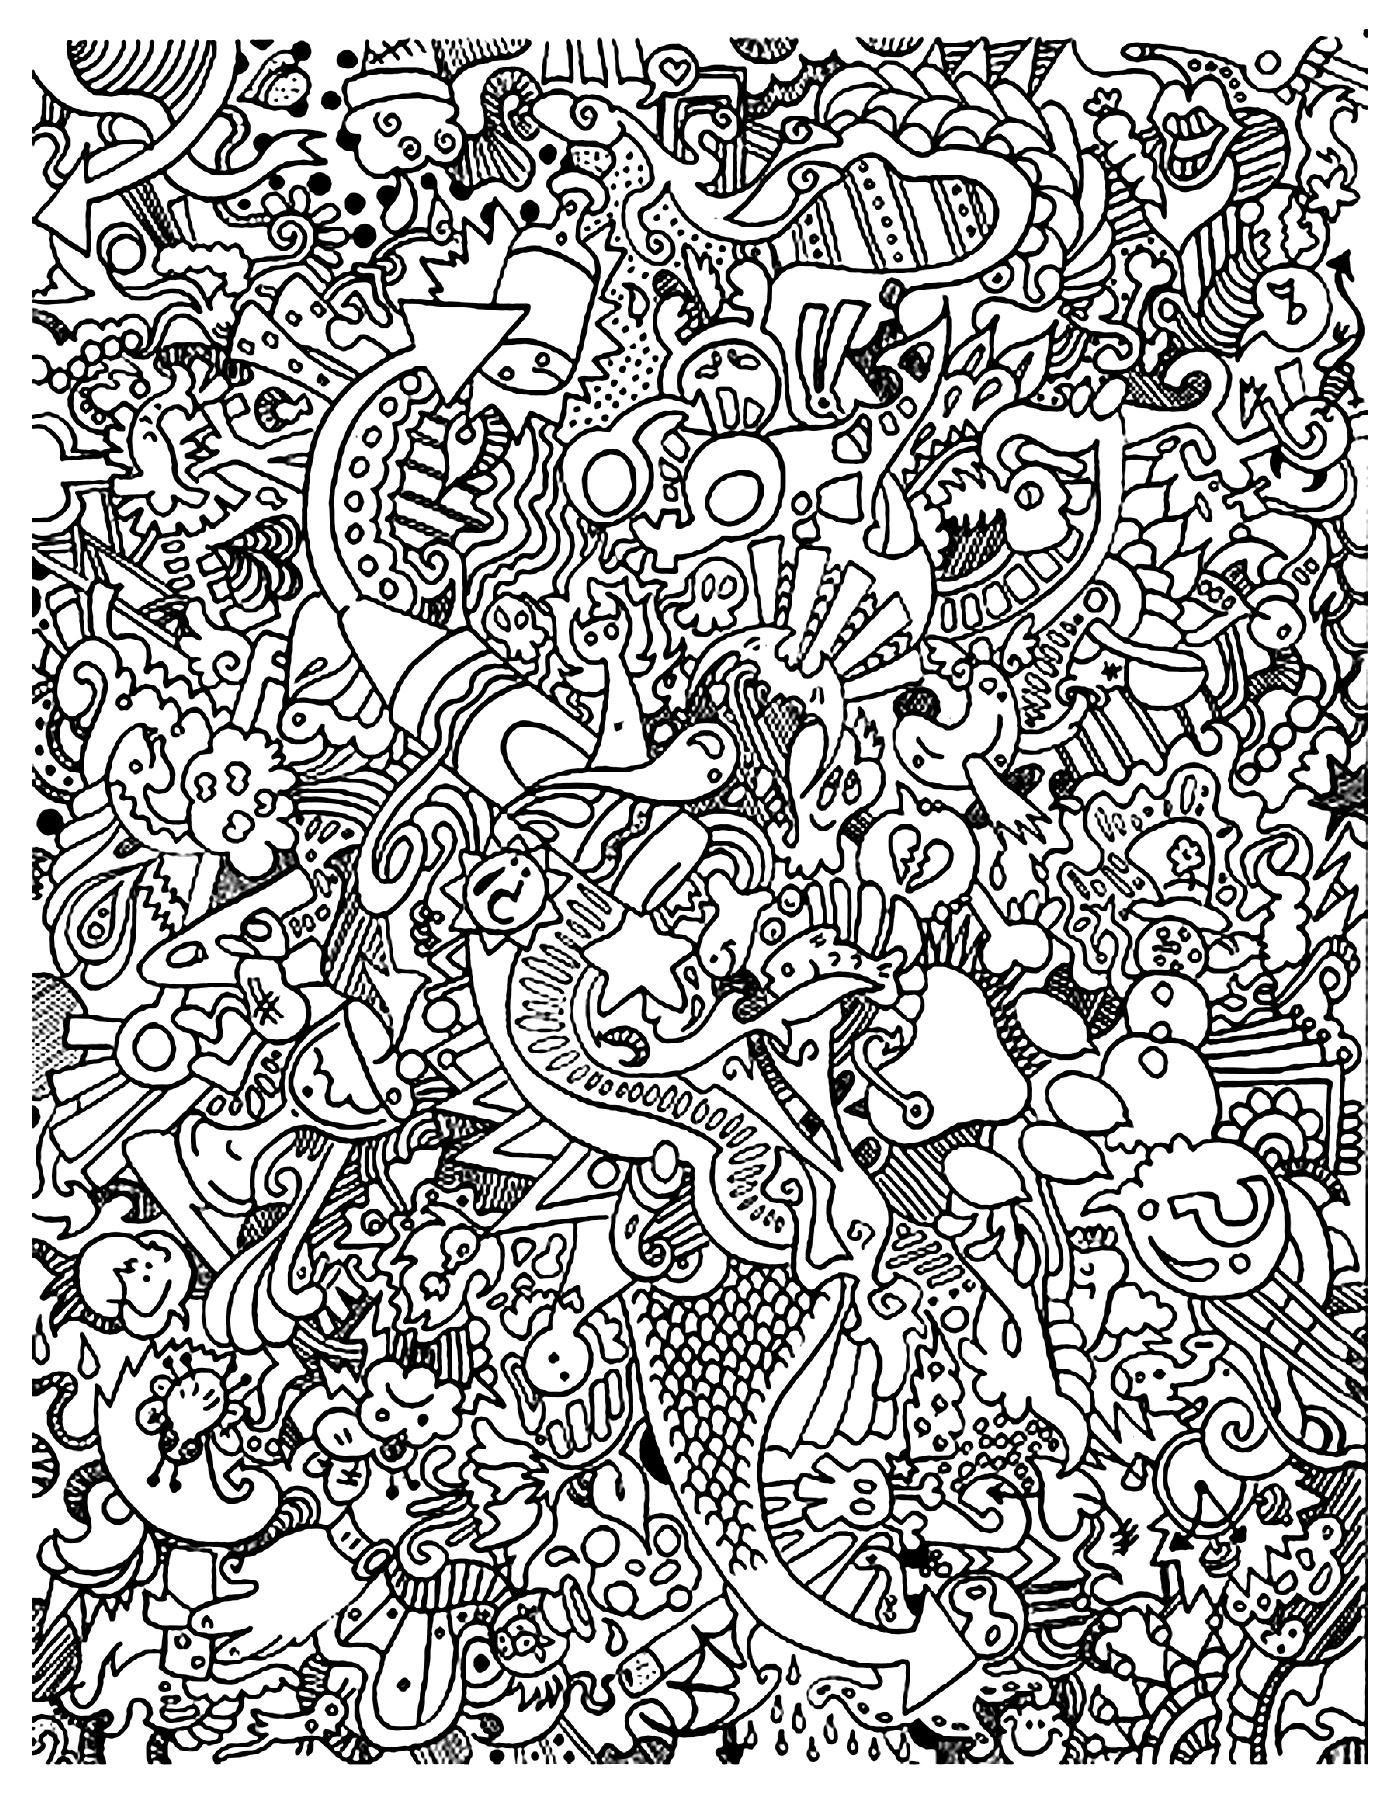 Doodle art doodling 18 - Doodle Art / Doodling Adult Coloring Pages